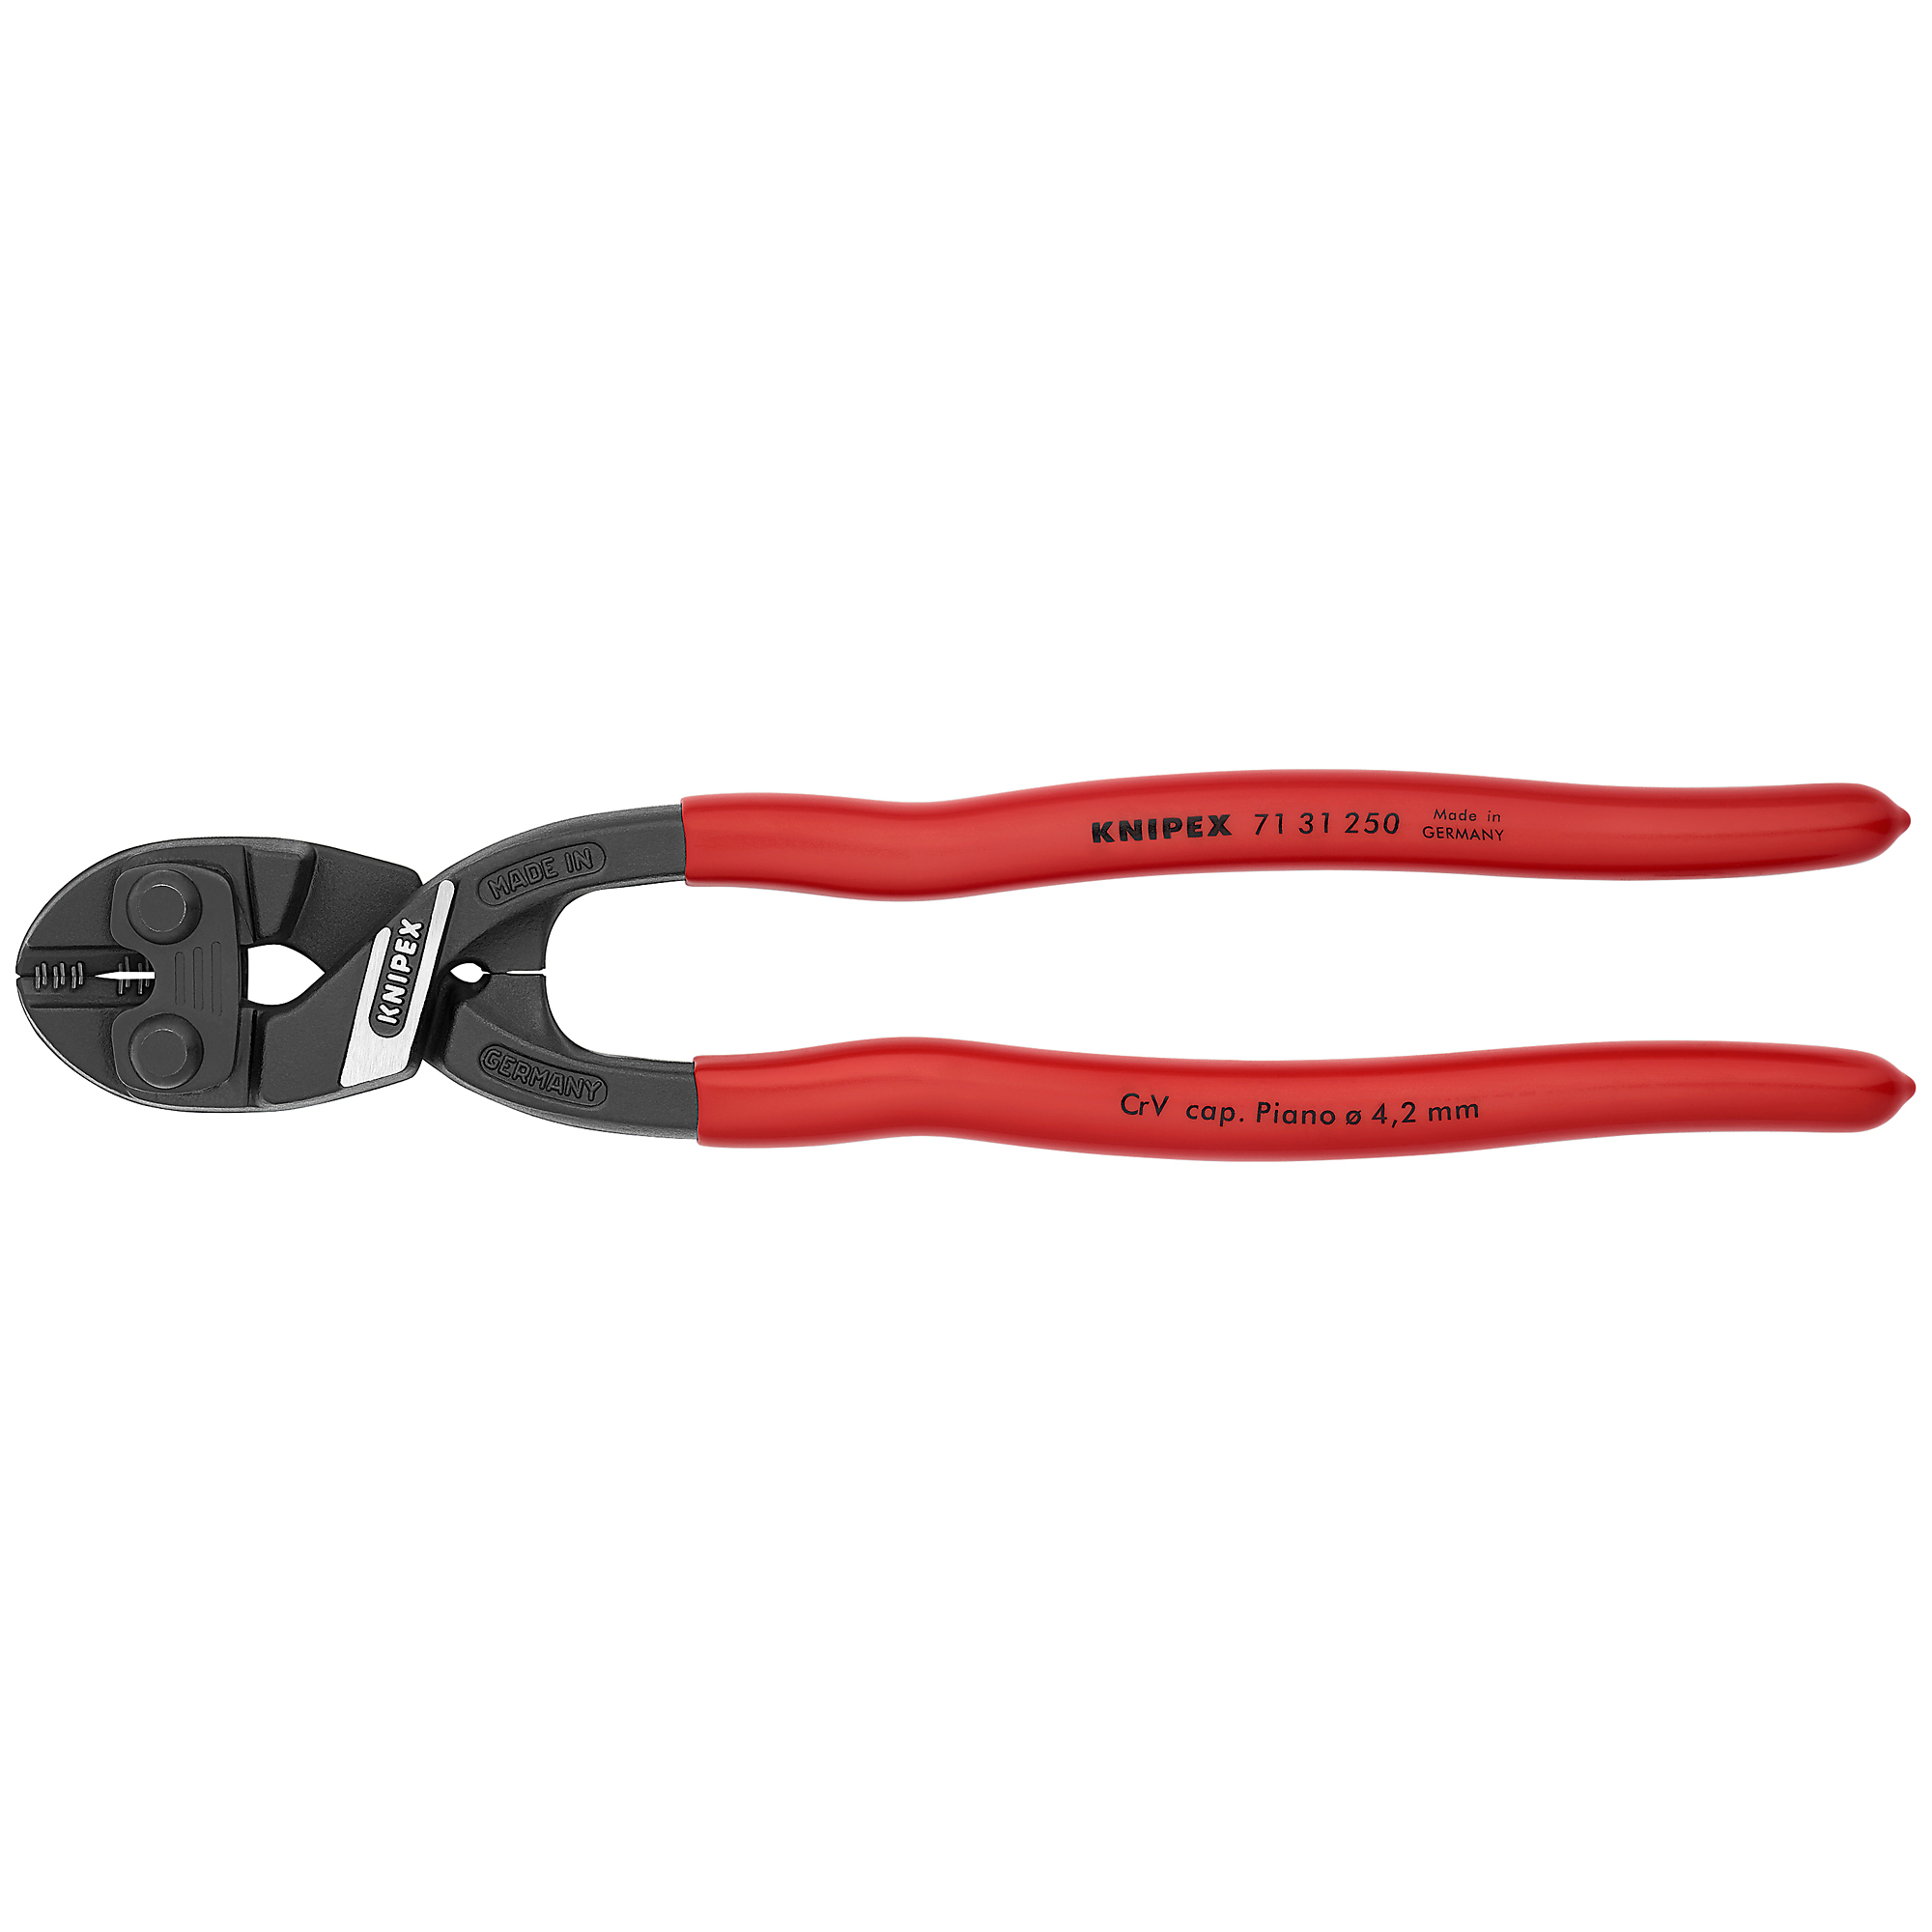 KNIPEX, CoBolt HL XL Bolt Cutters-Notched Blade, 10Inch, Tool Length 10 in, Jaw Opening 0.38 in, Cutting Capacity 0.25 in, Model 71 31 250